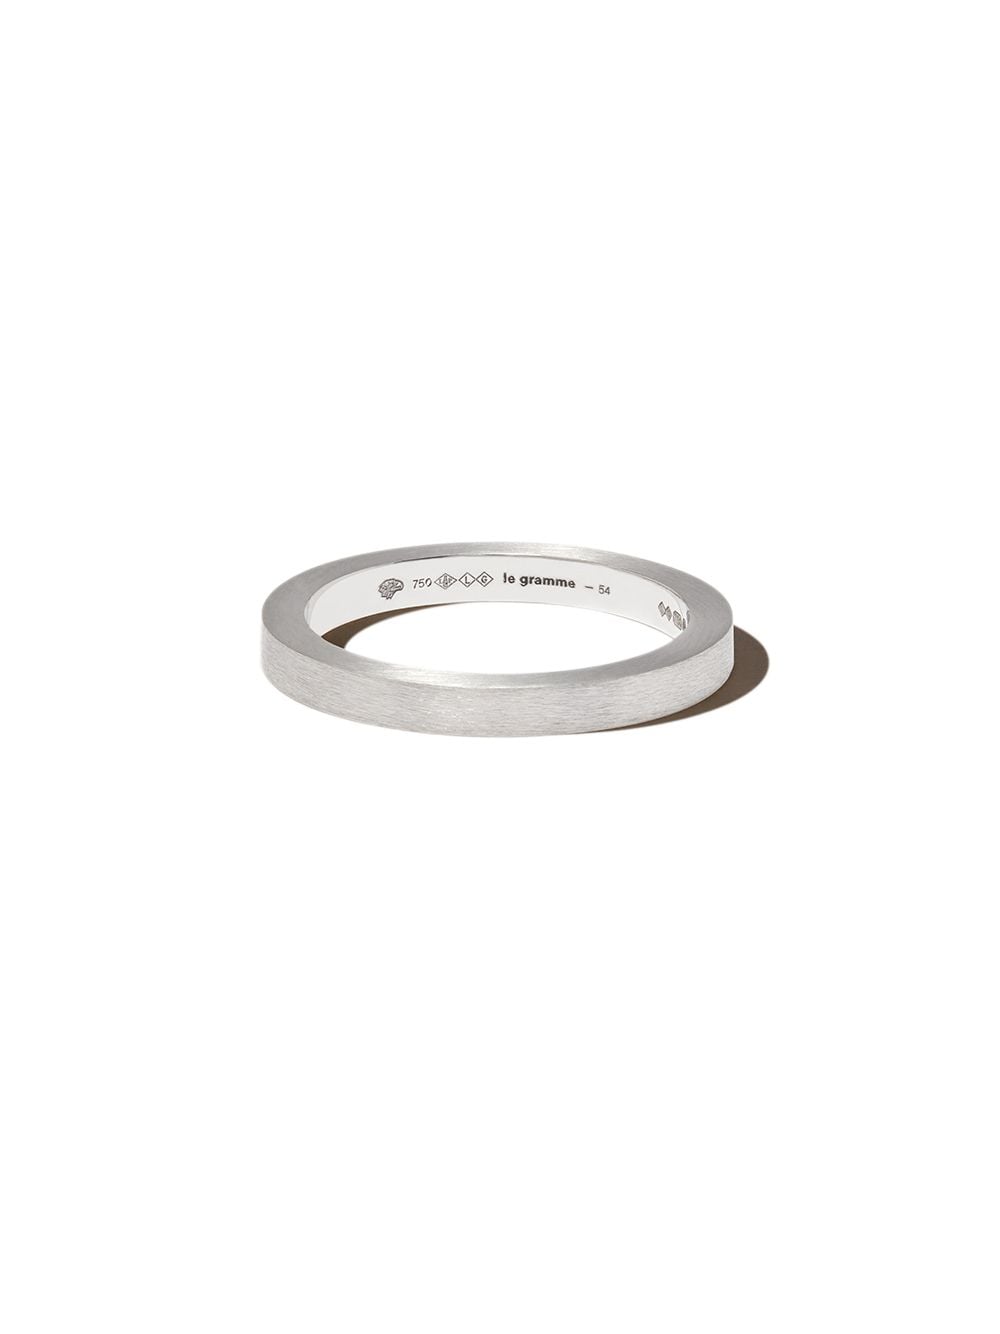 Le Gramme 18kt white gold 5g ribbon brushed band ring - Silver von Le Gramme